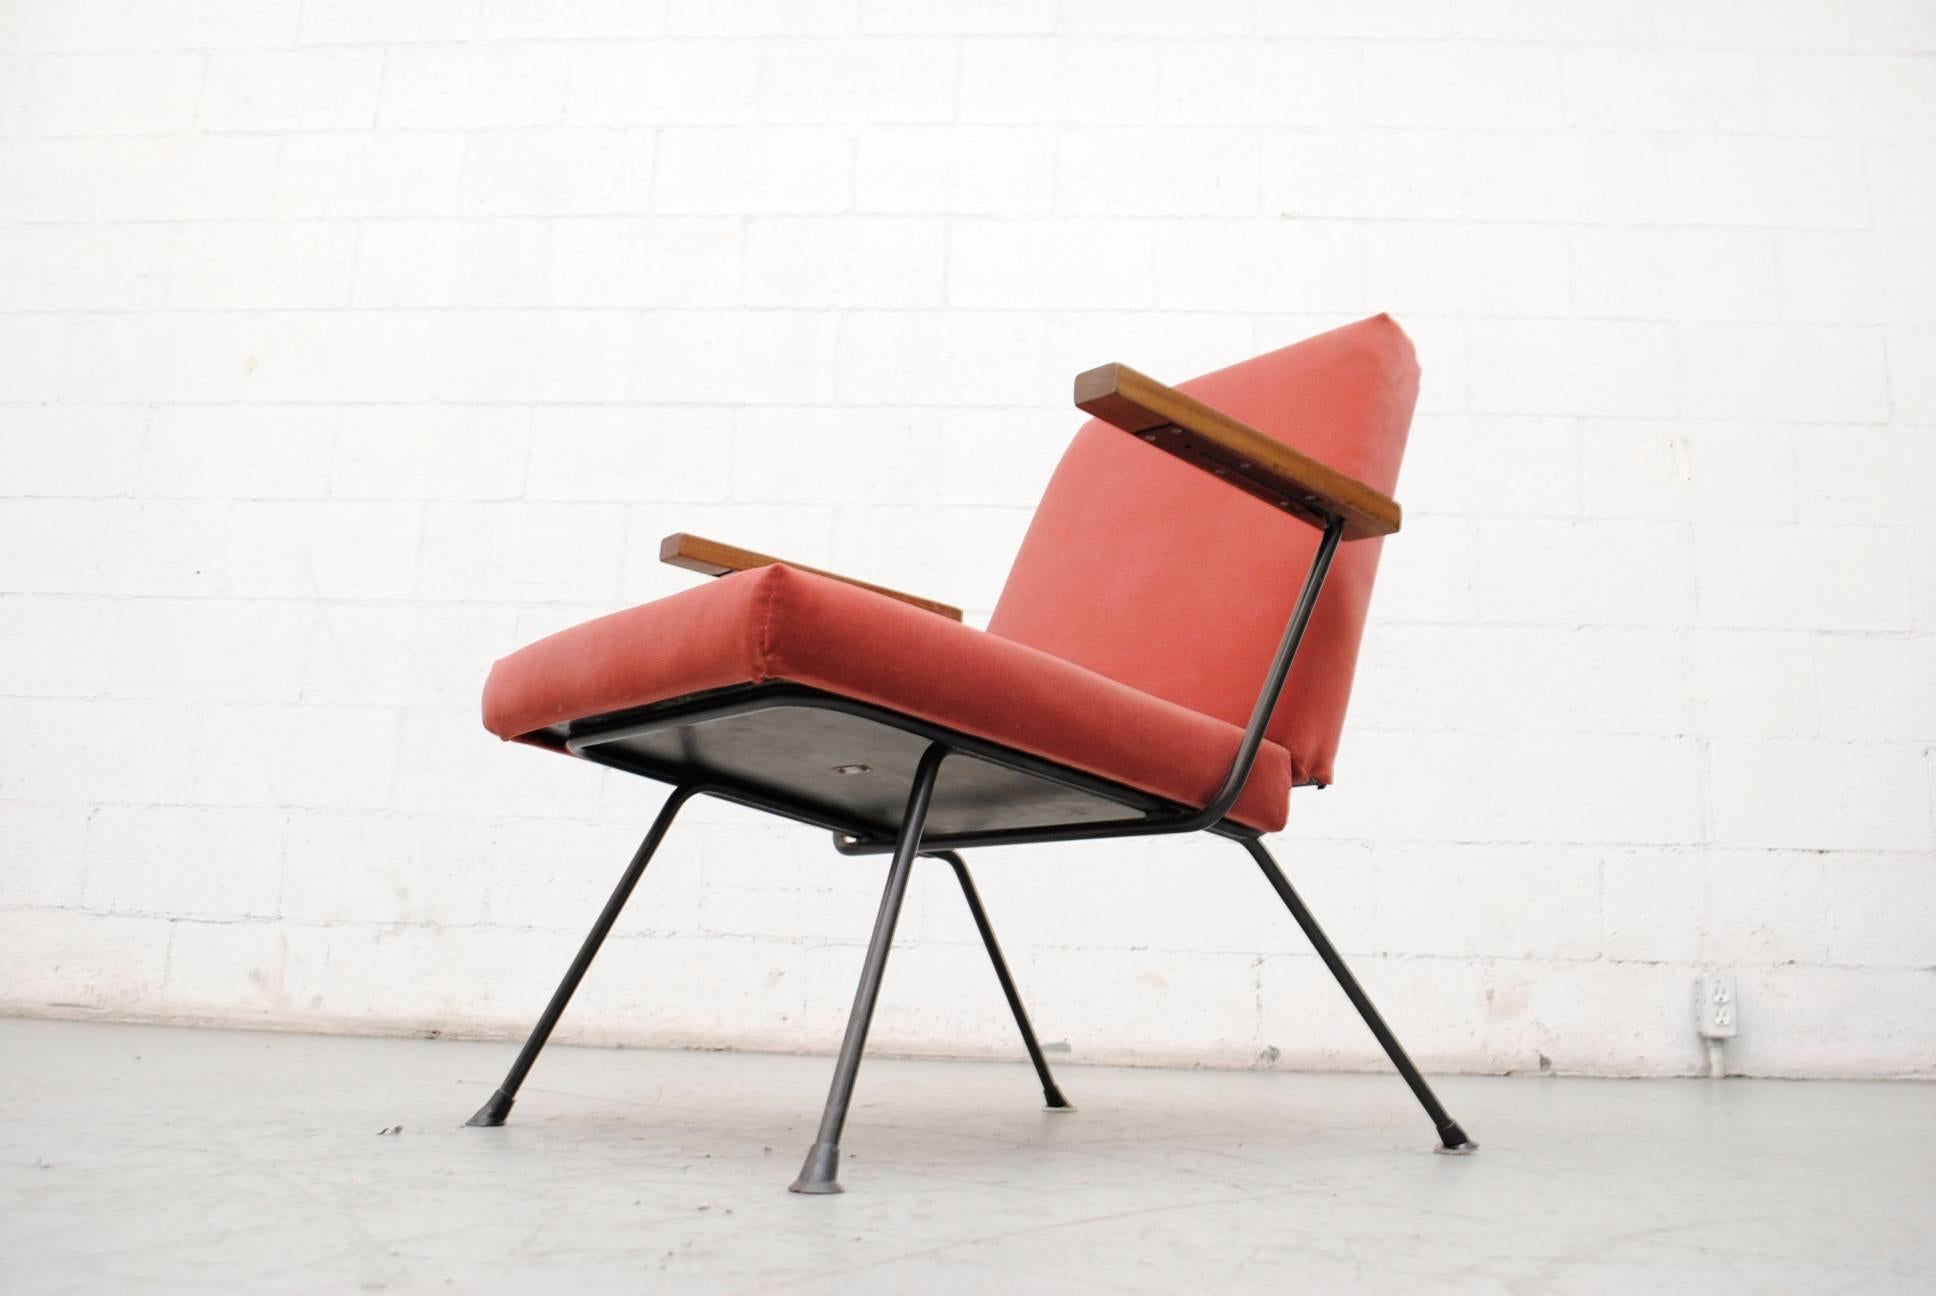 Gorgeous Dutch lounge chair by A.R. Cordemeyer with teak arms. Original black enameled metal frame. Newly upholstered in velvet. Frame shows some signs of wear consistent with its age and usage.